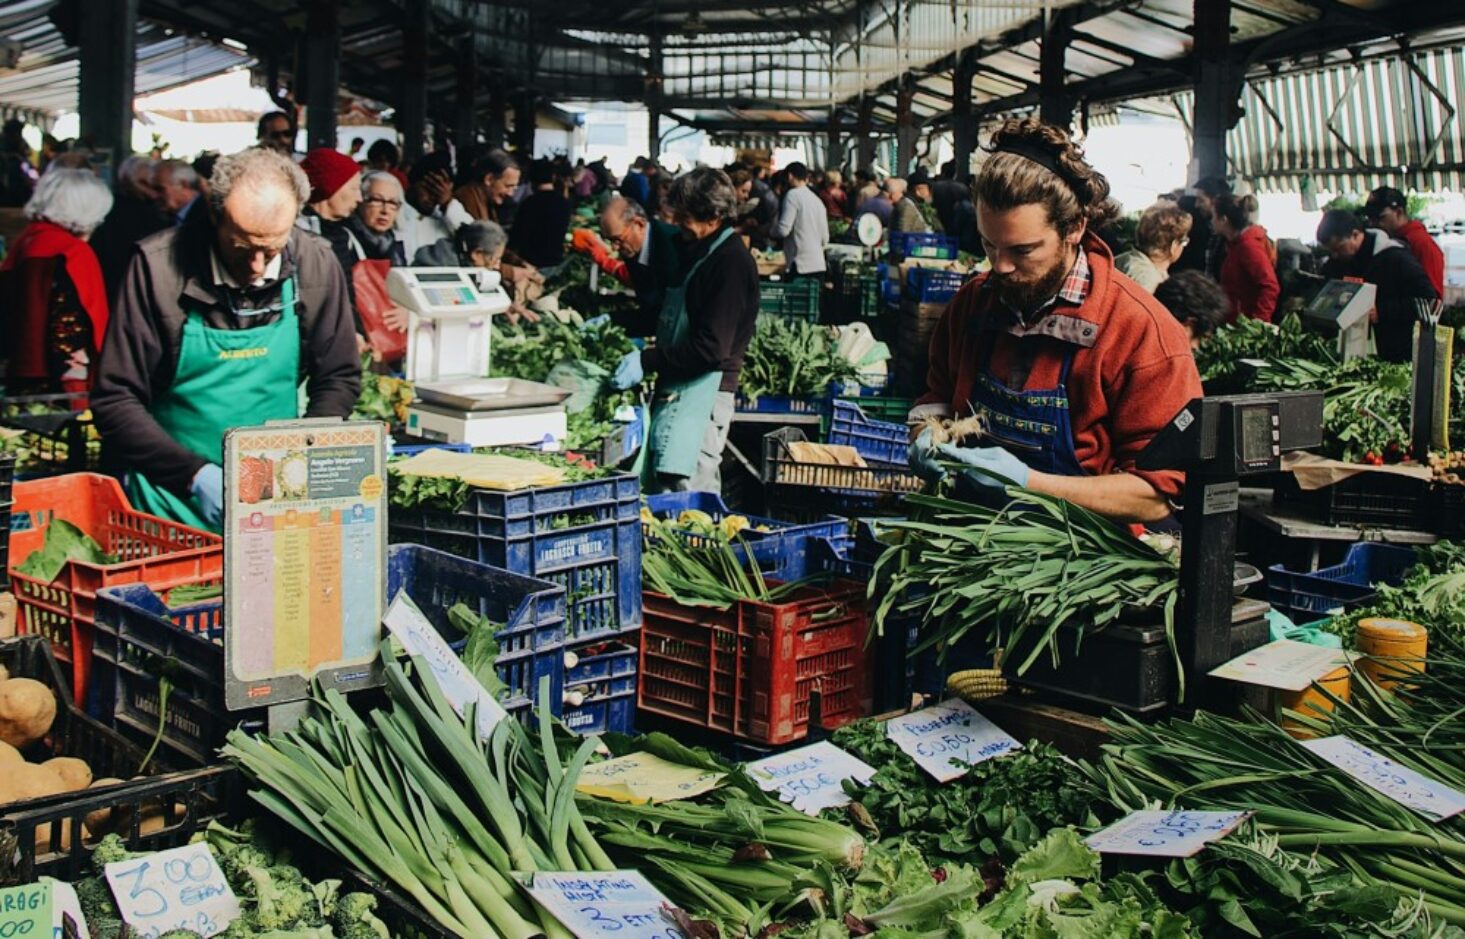 A Guide to the Manchester Farmers Markets